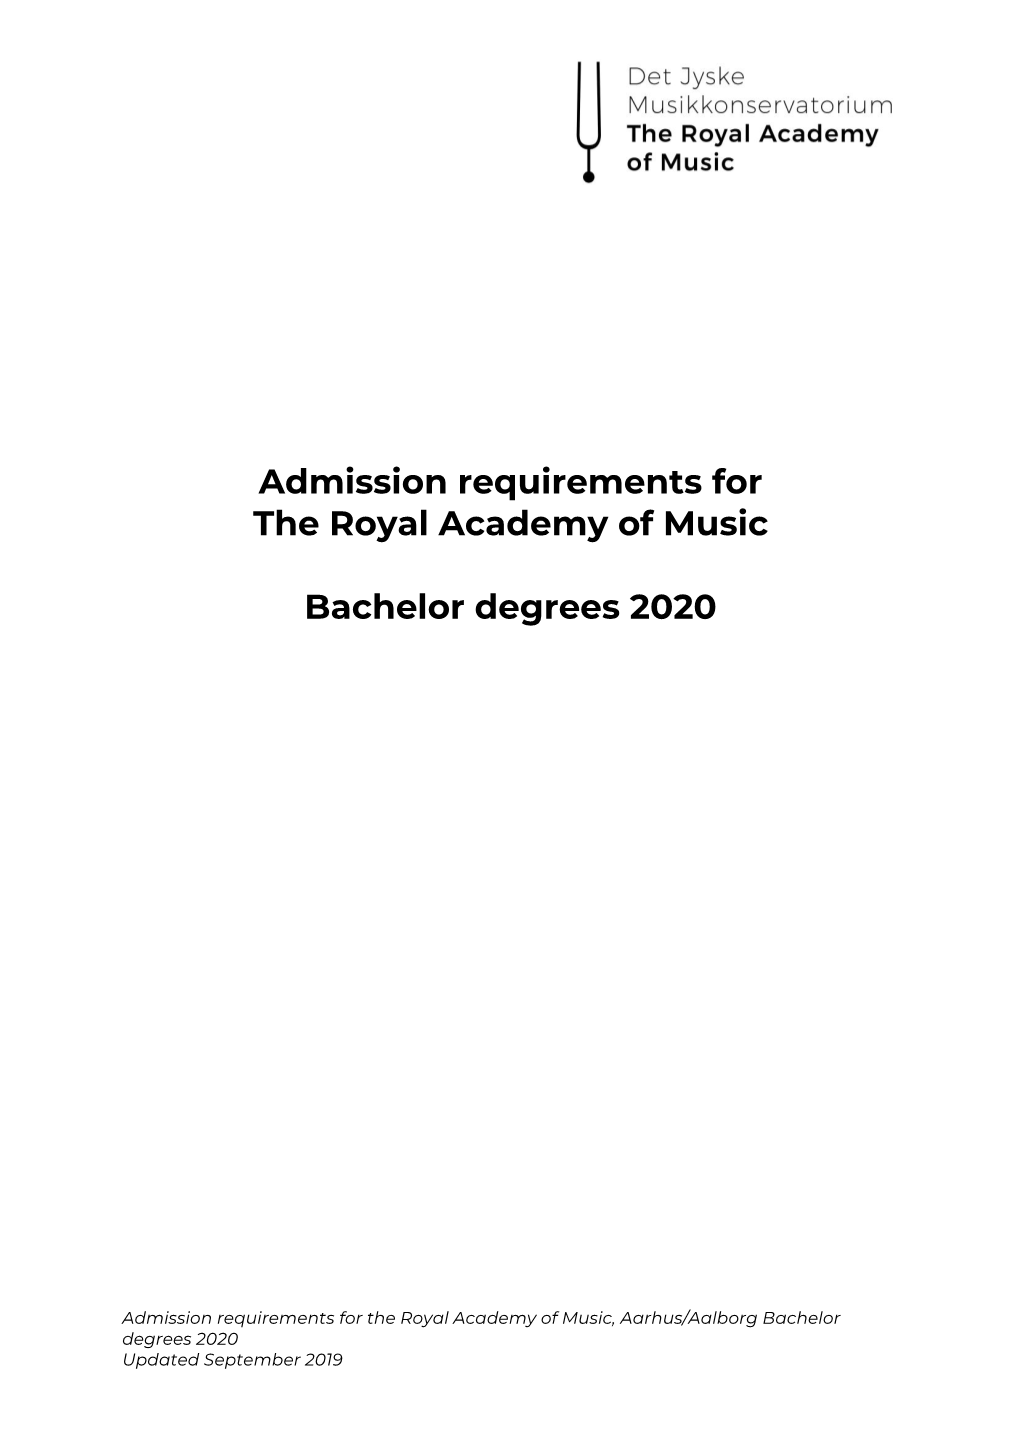 Admission Requirements for the Royal Academy of Music Bachelor